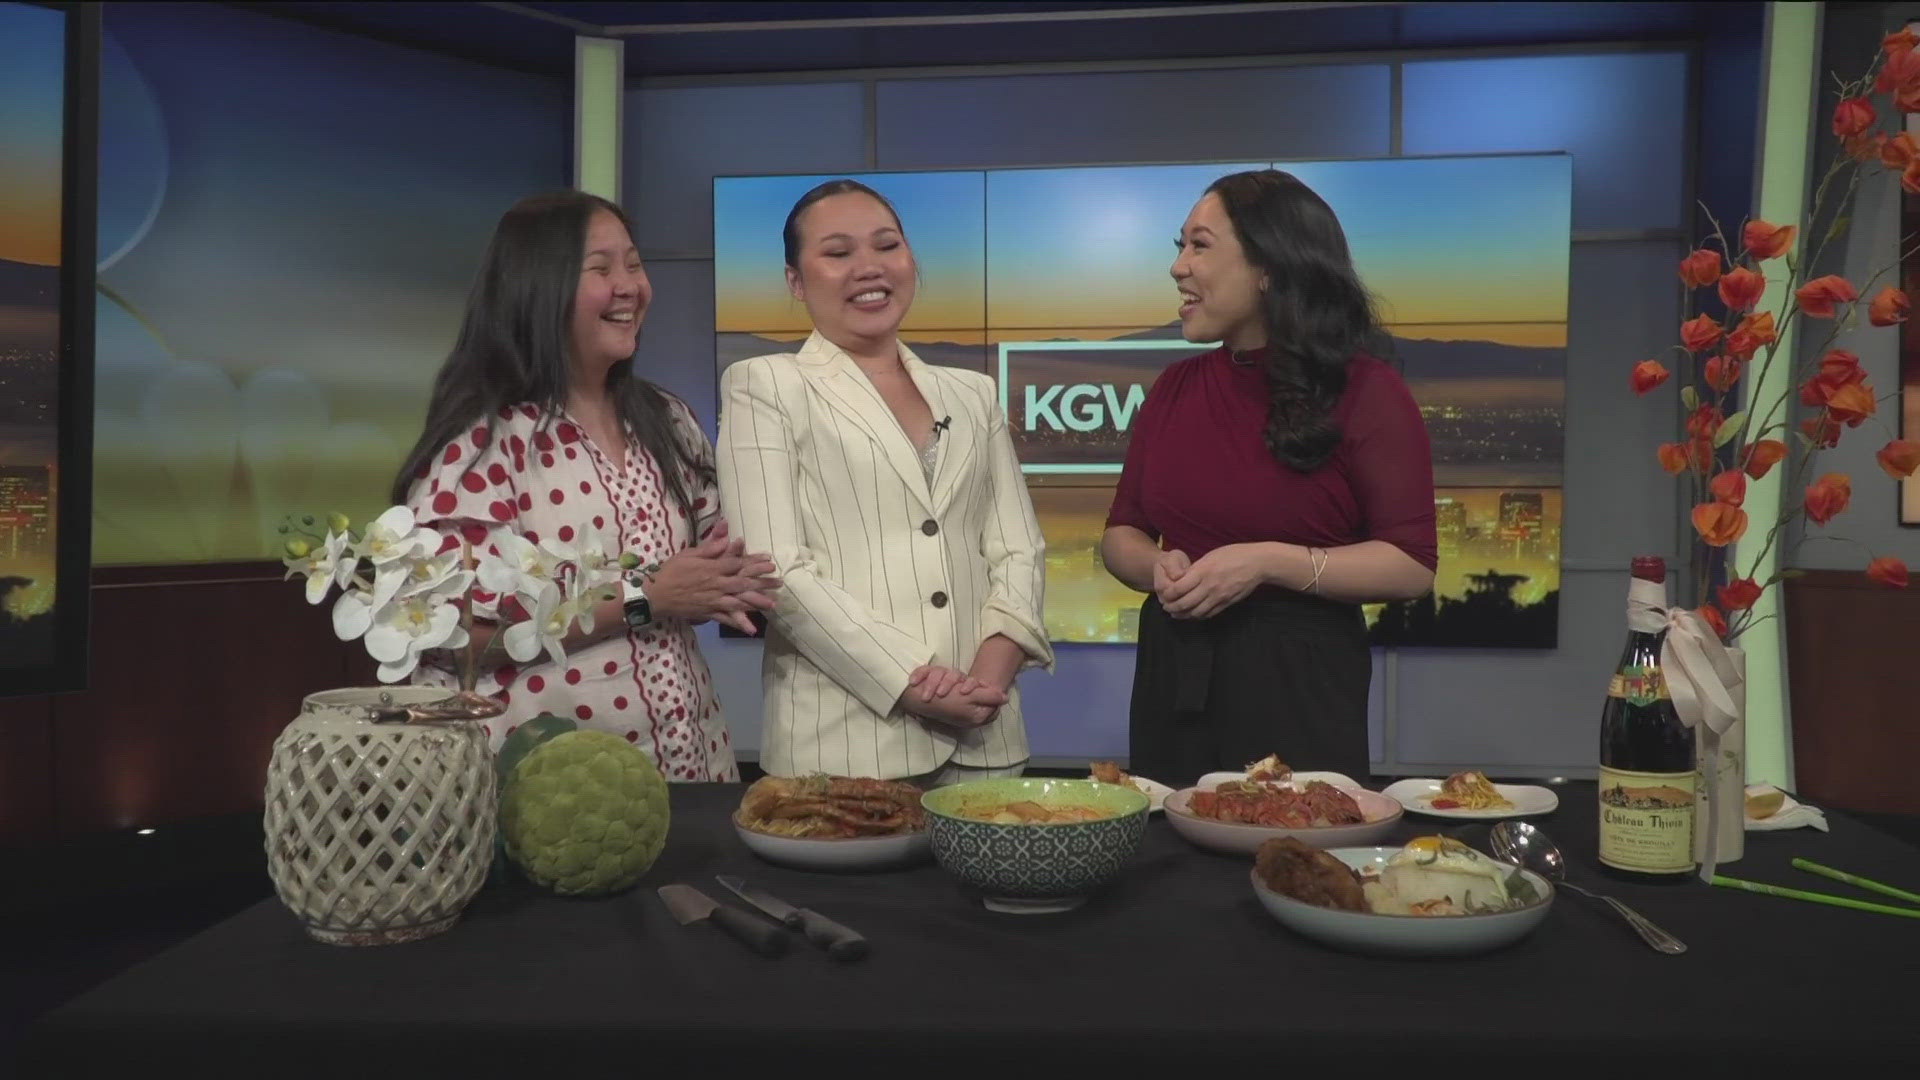 Friendship Kitchen is run by lesbian couple Trang Nguyen and Wei-En Tan. Their food is a fusion of their cultures. They have 2 highly popular restaurants in Portland